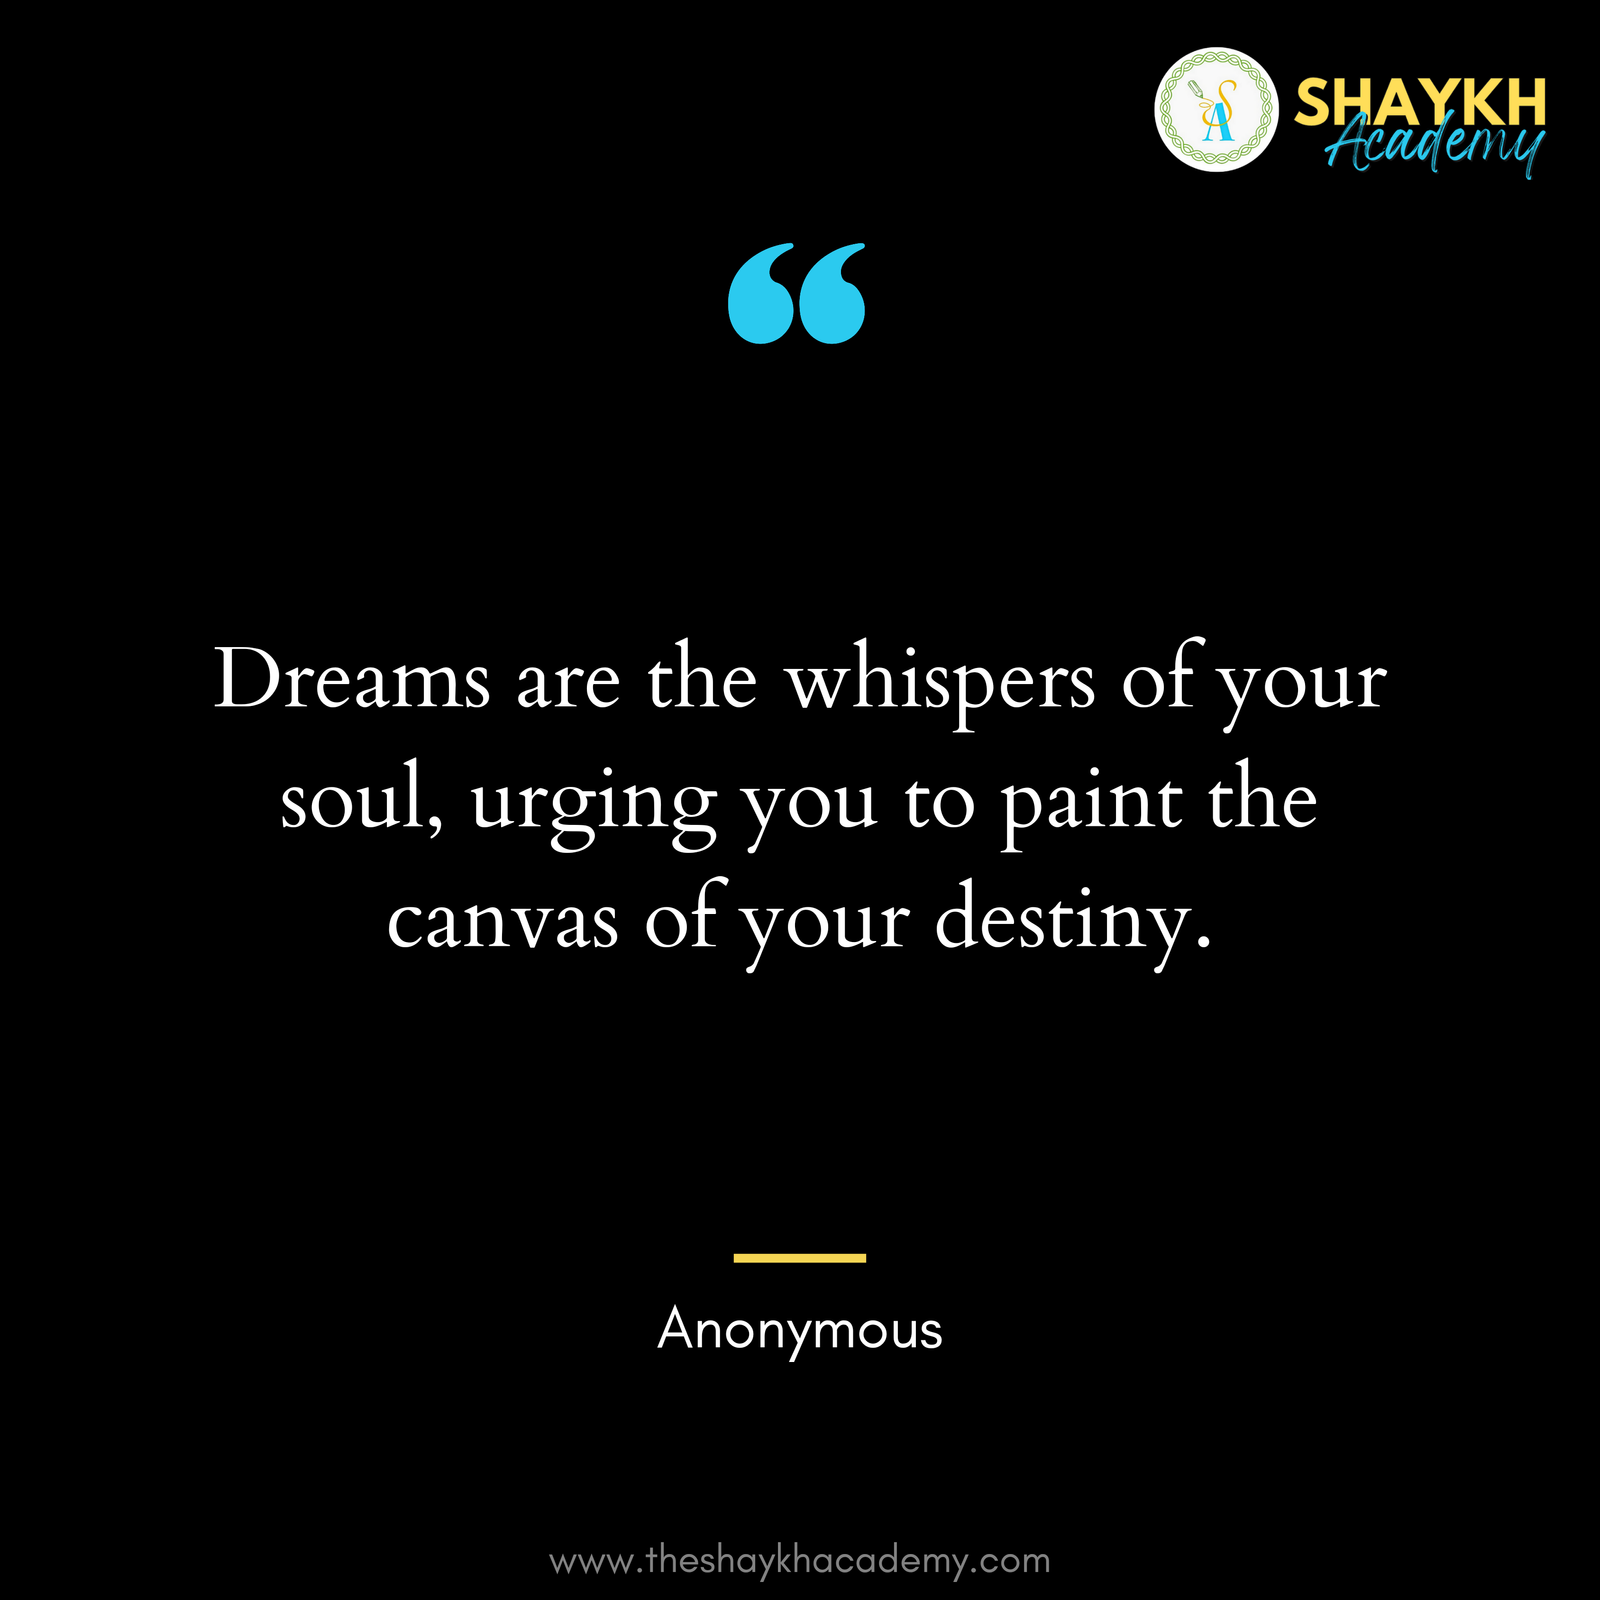 Dreams are the whispers of your soul, urging you to paint the canvas of your destiny.